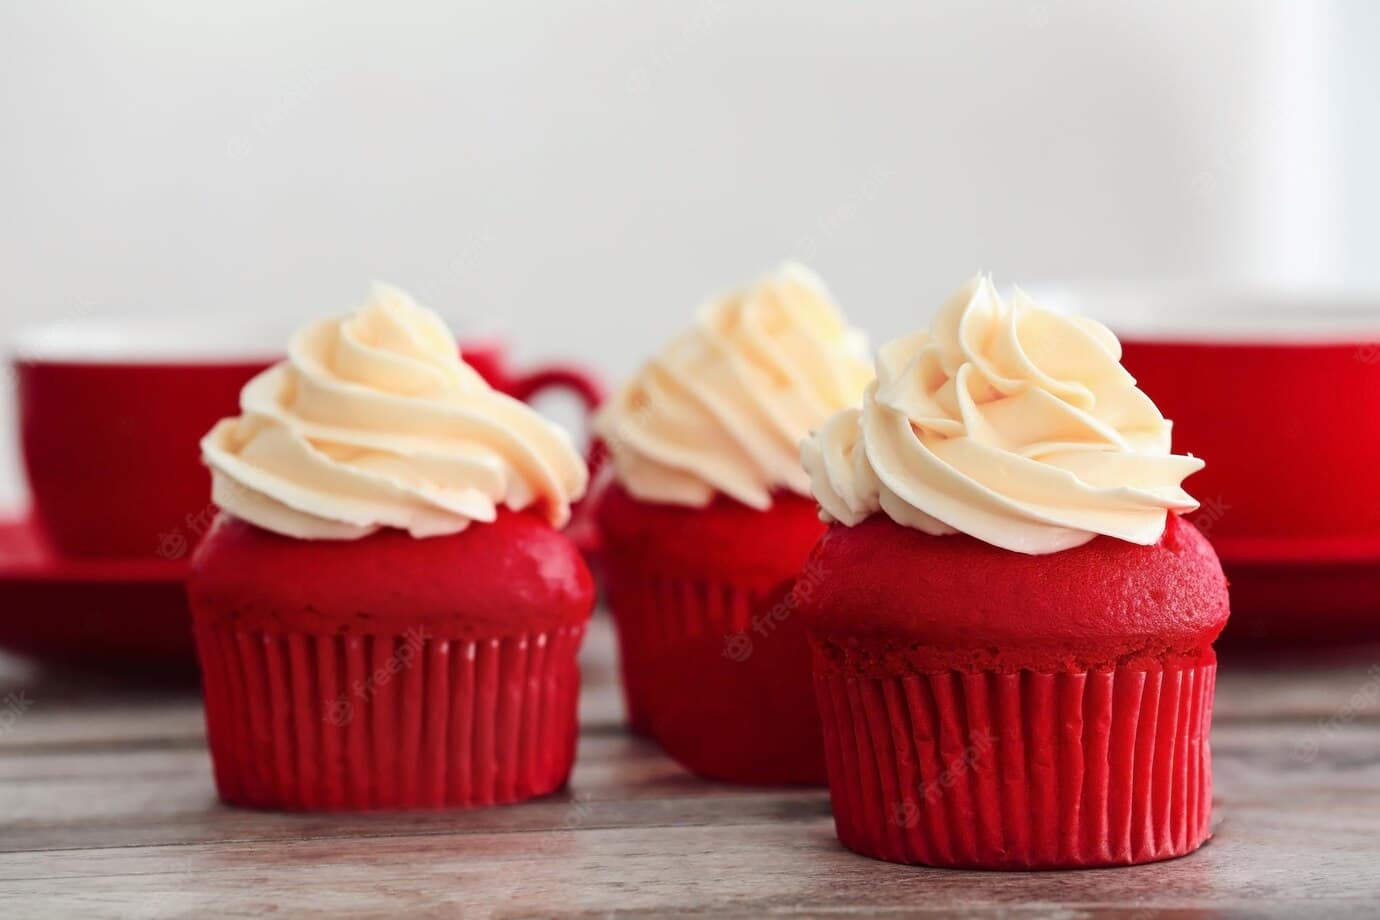 delicious-red-velvet-cupcakes-table_392895-105948